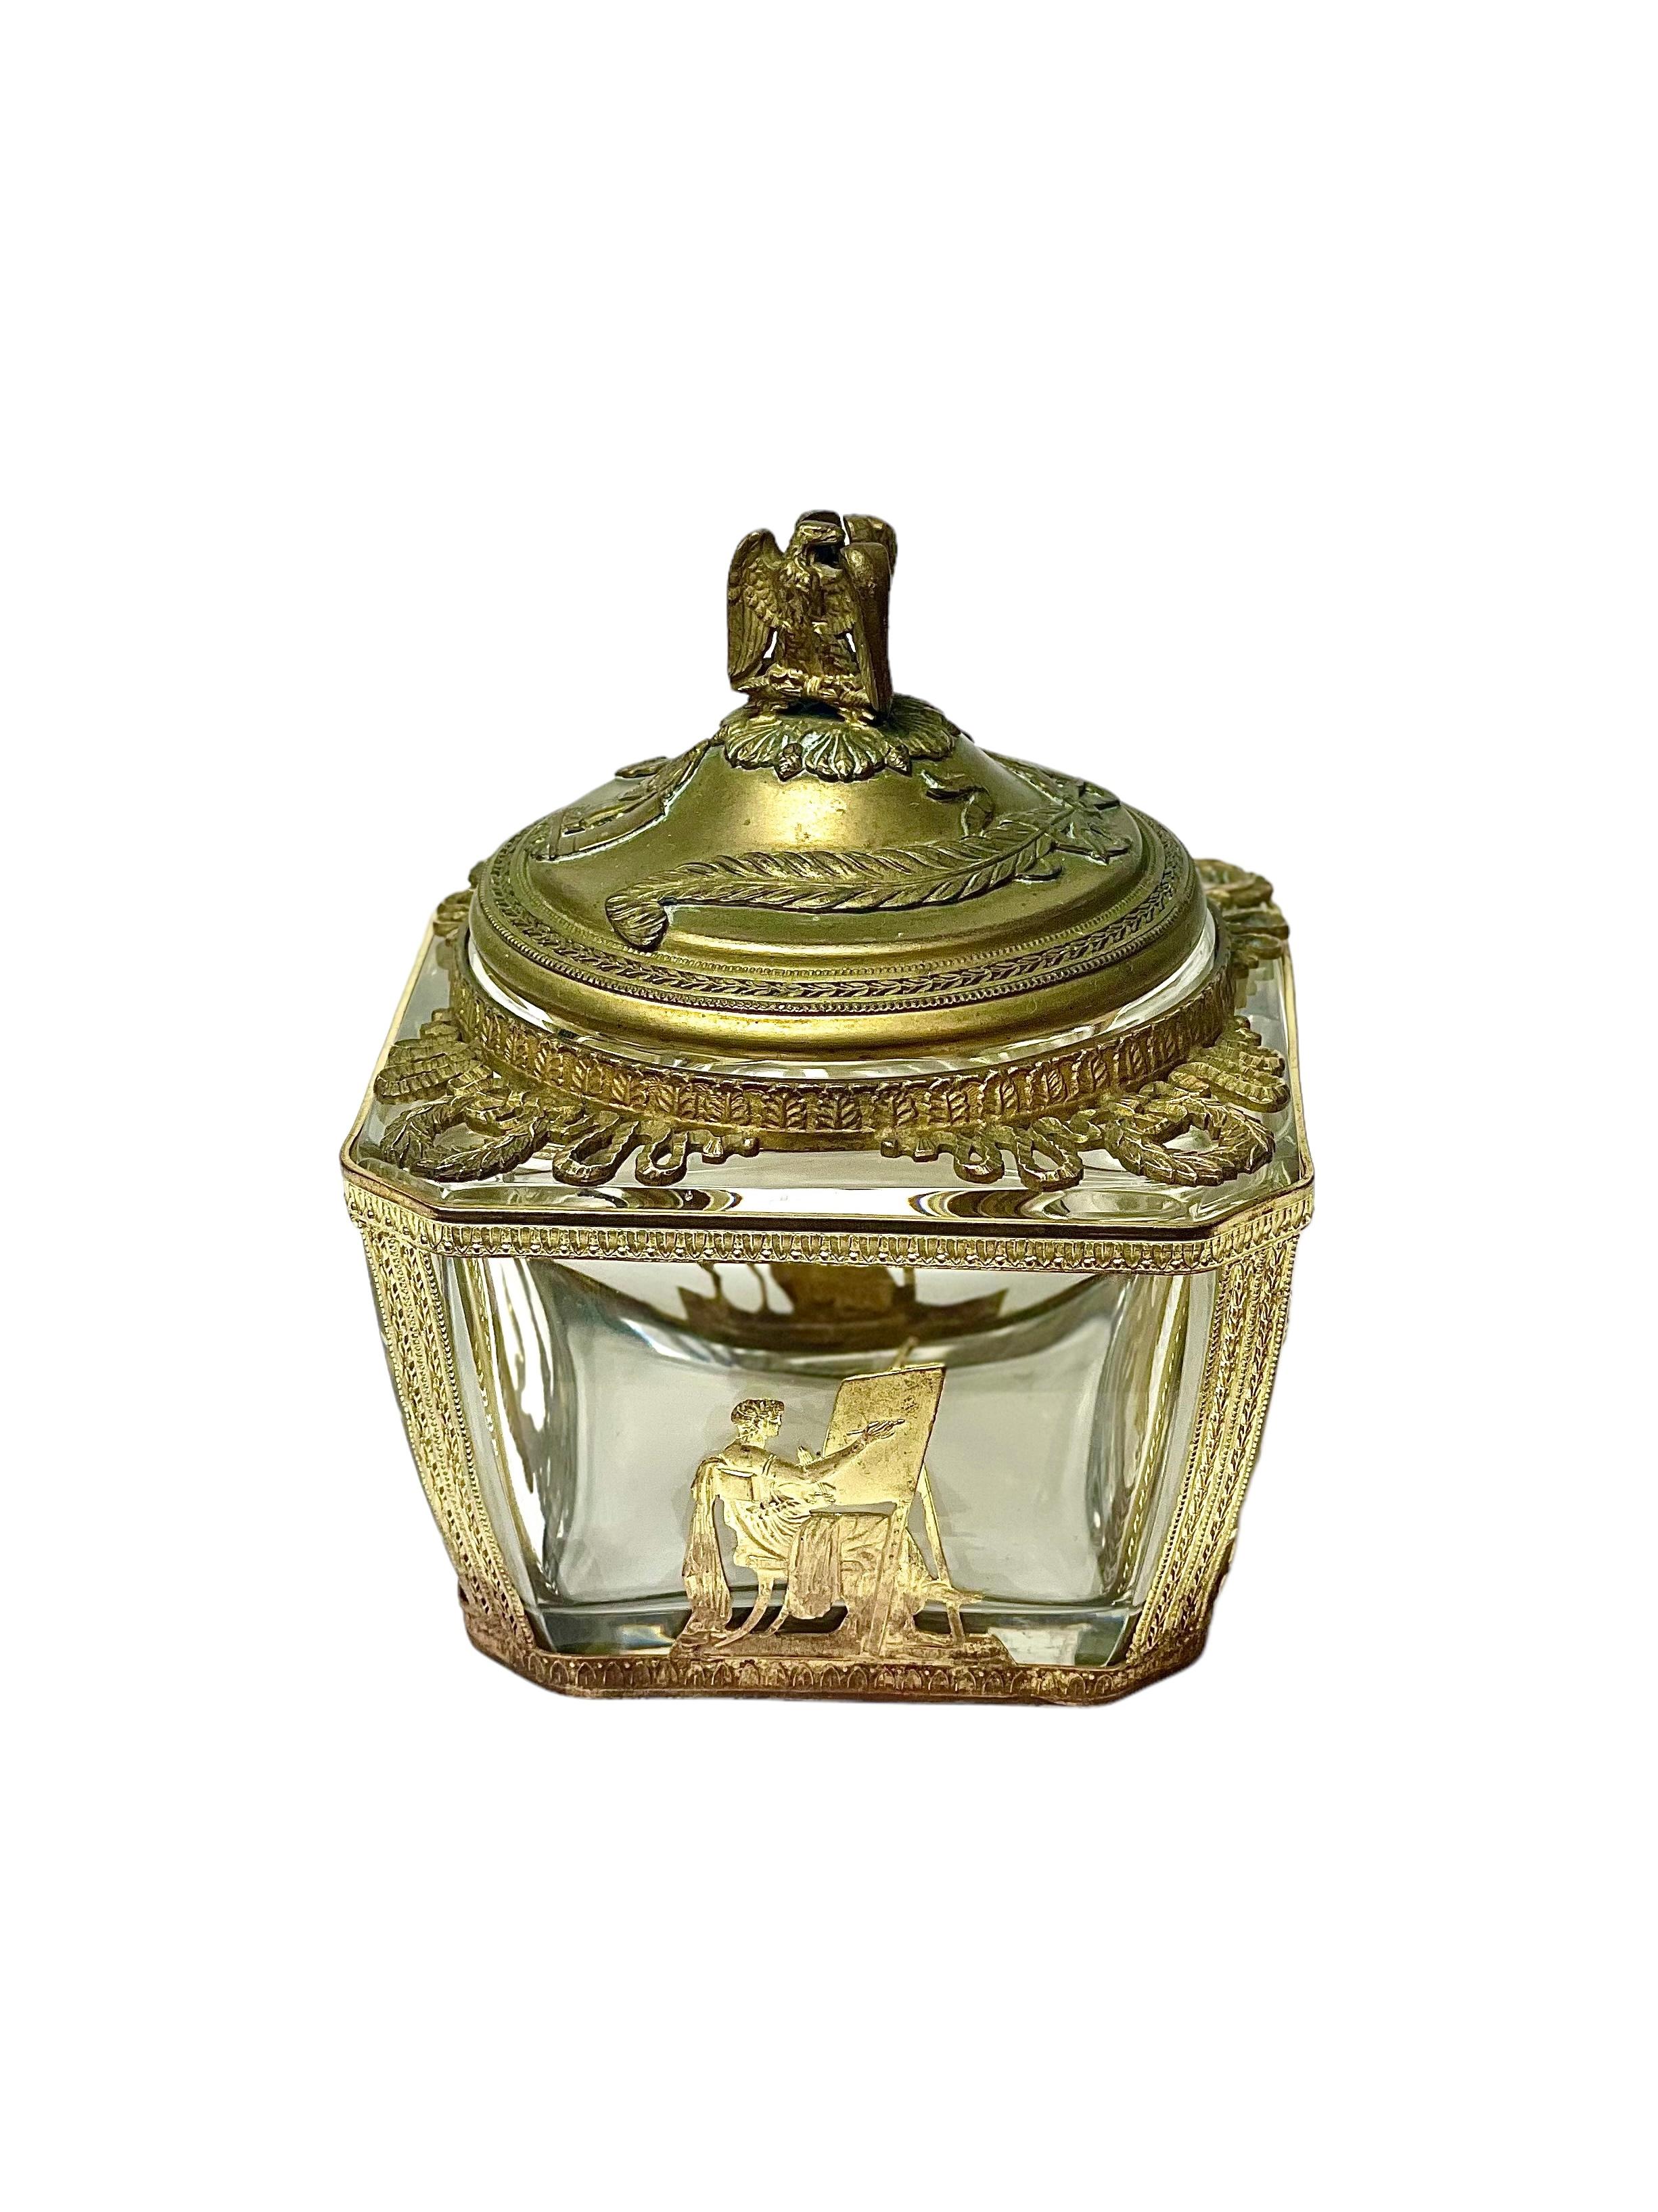 A very decorative Empire-style crystal sweet box, or Bonbonnière, intricately clad in a gilt-brass frame, with elaborately worked gilt metal mounts of the arts, a warrior on his chariot, and laurel wreaths. This square-sided crystal glass box dates